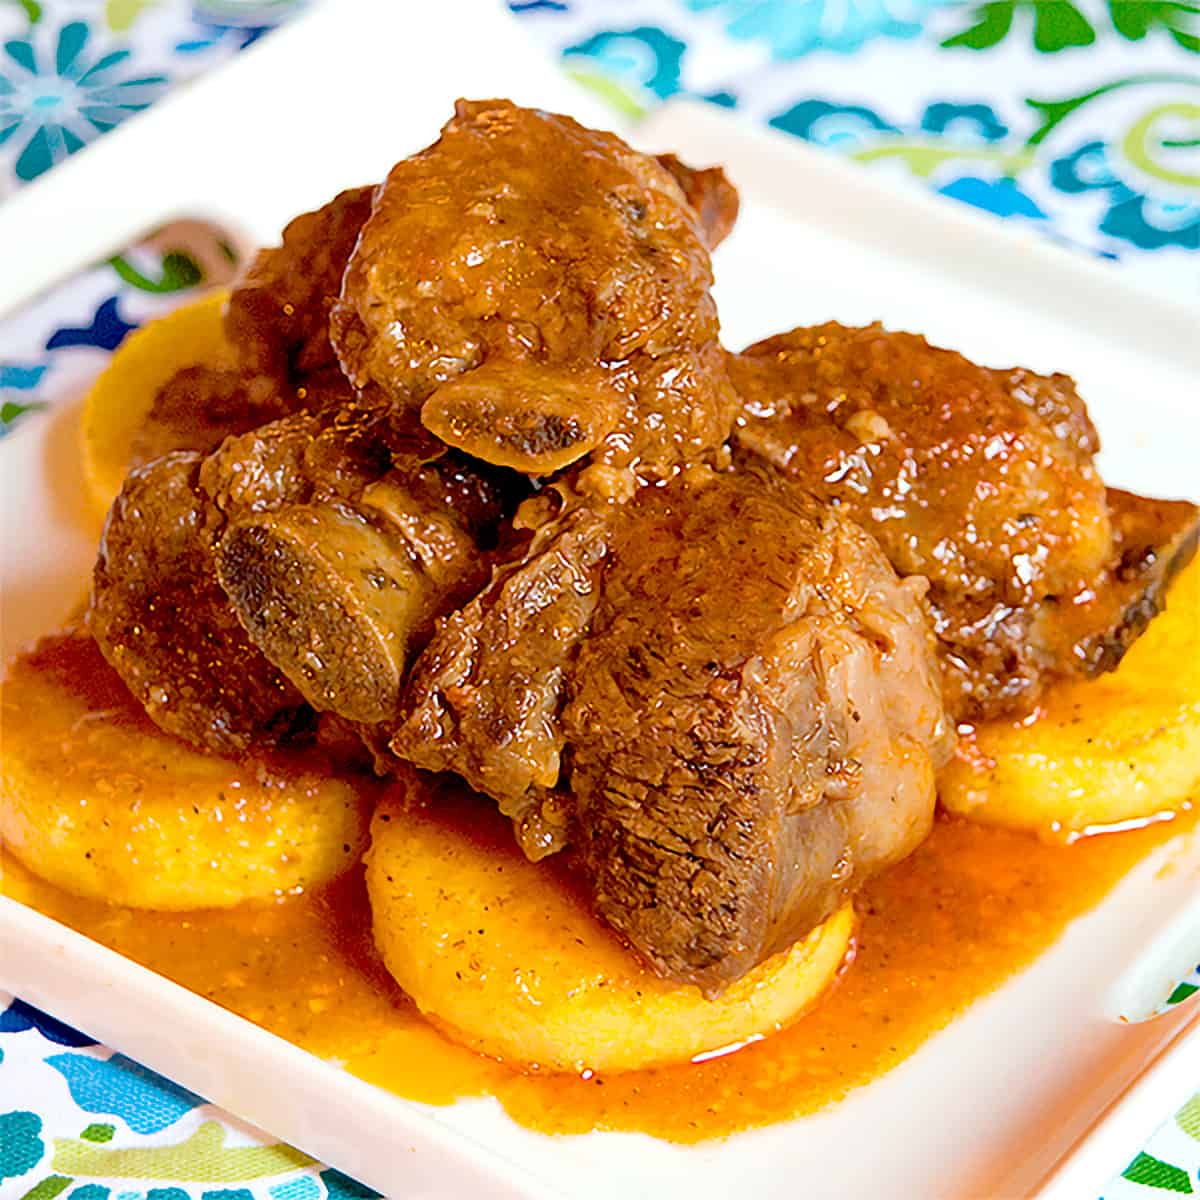 Dutch Oven Braised Short Ribs with Polenta